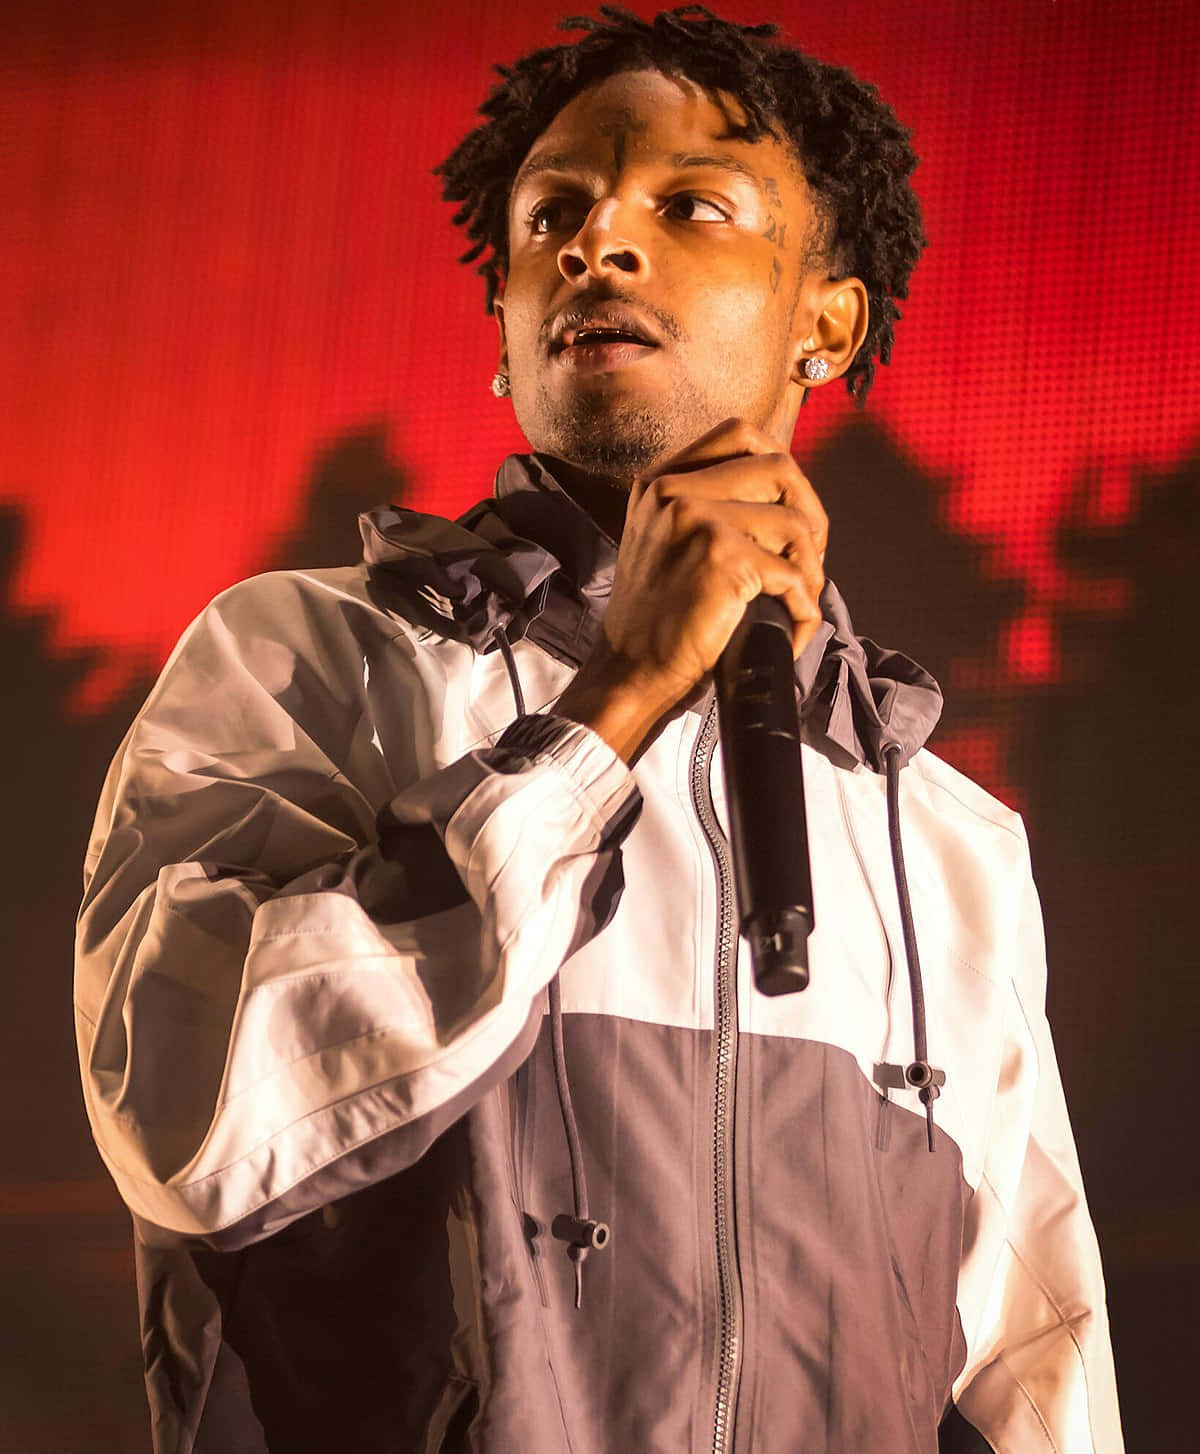 Grammy-nominated rapper 21 Savage rocks the stage with a powerful performance